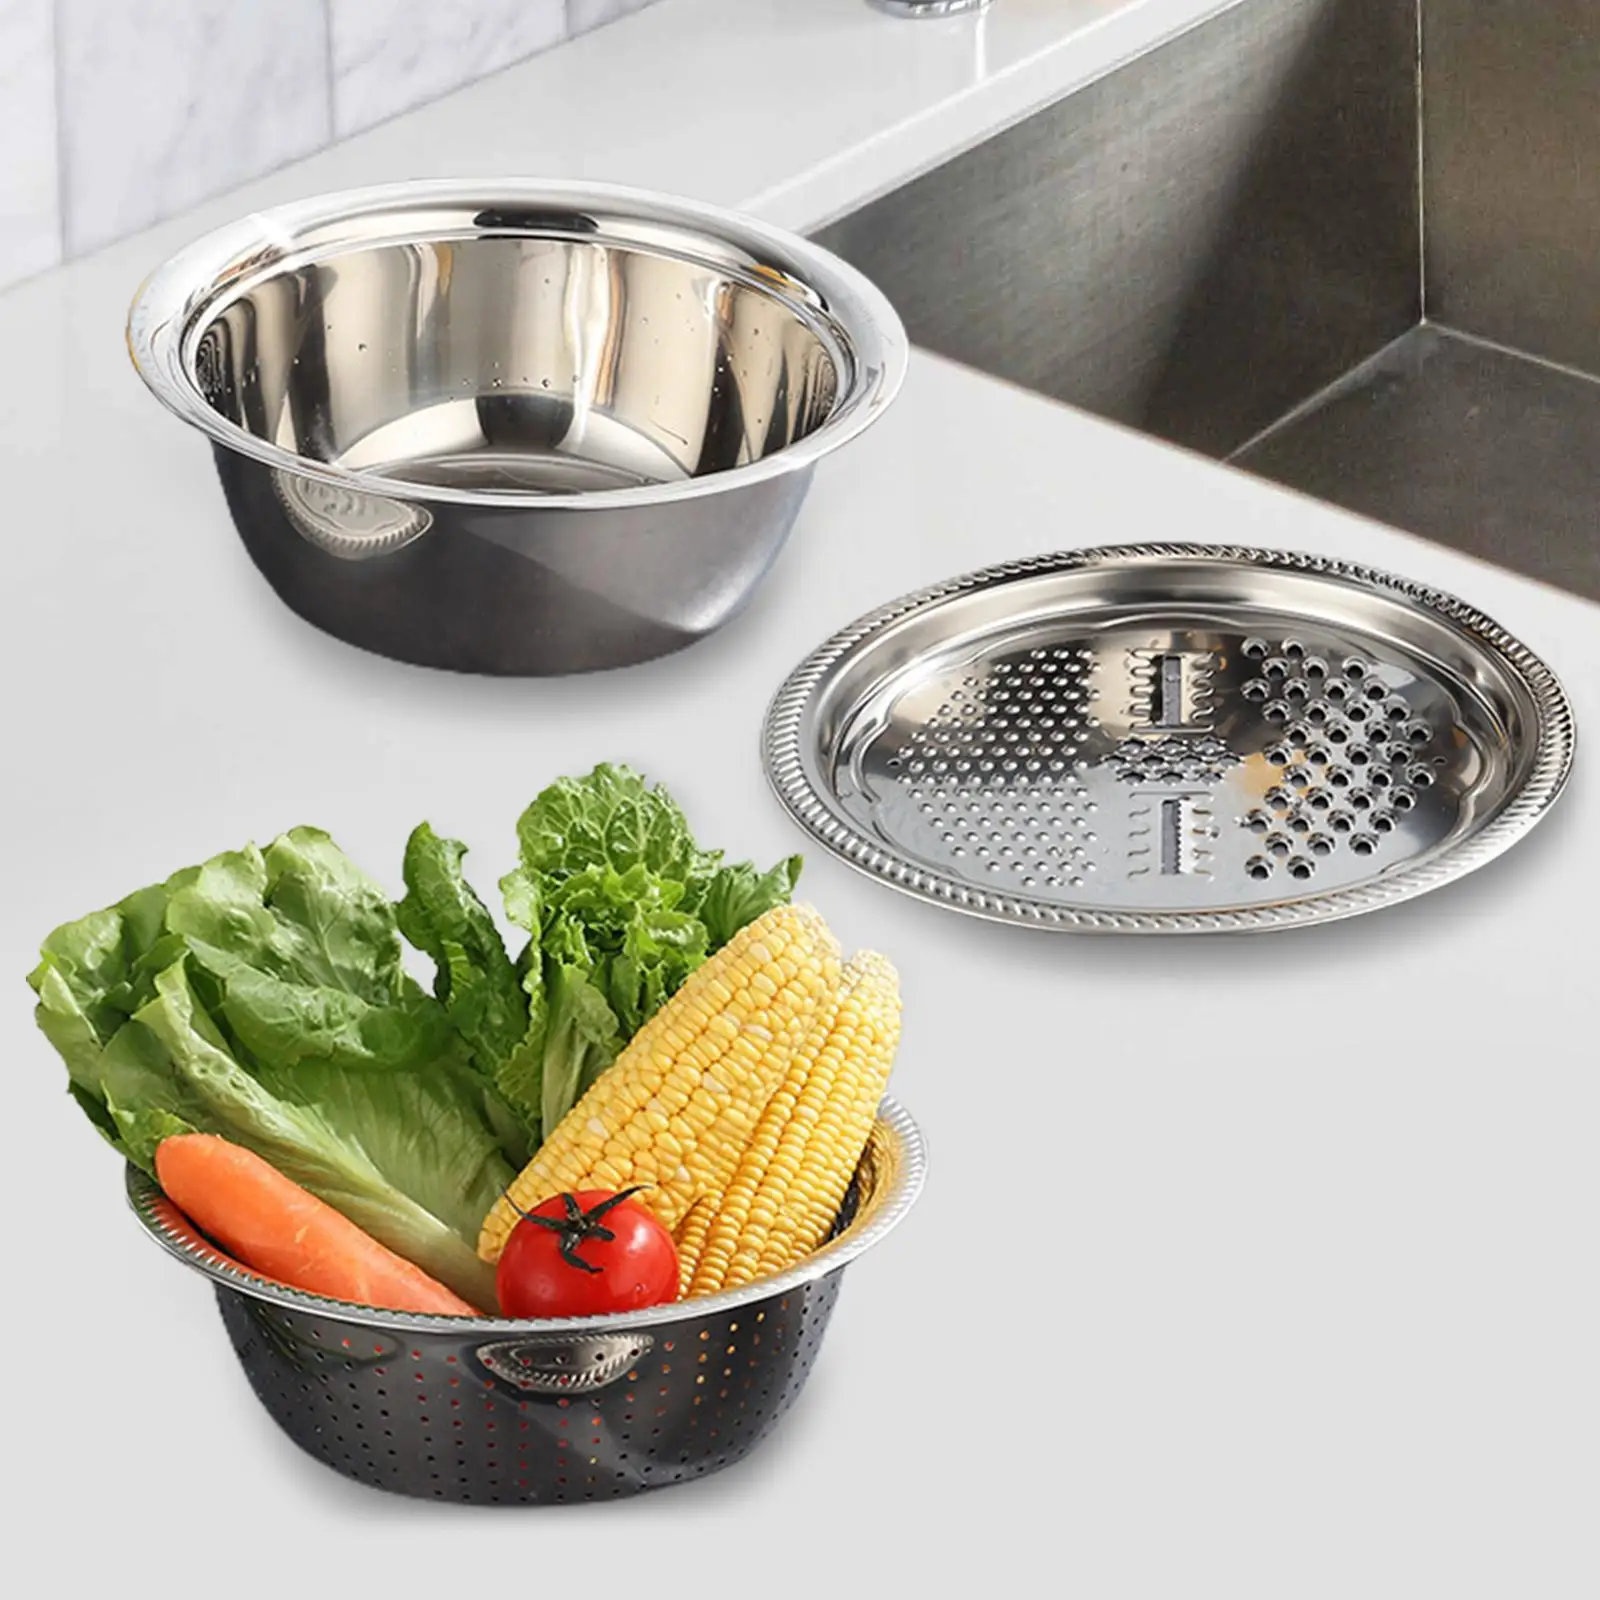 Stainless Steel Basin Kit Salad Bowl Portable Grater Strainer Kitchen 3 in 1